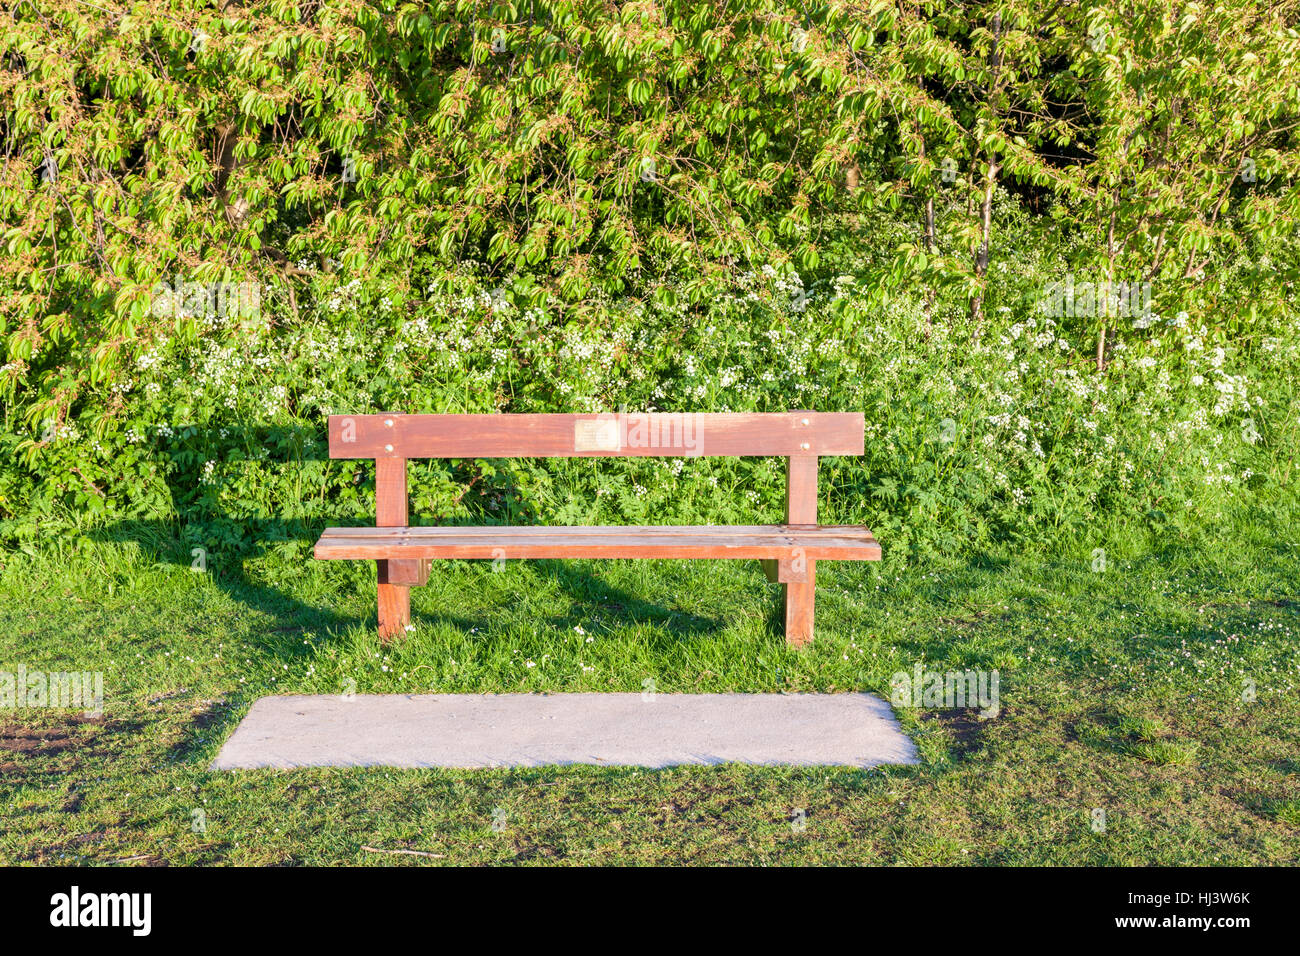 Wooden bench in memory of a relative or friend, Nottingham, England, UK Stock Photo